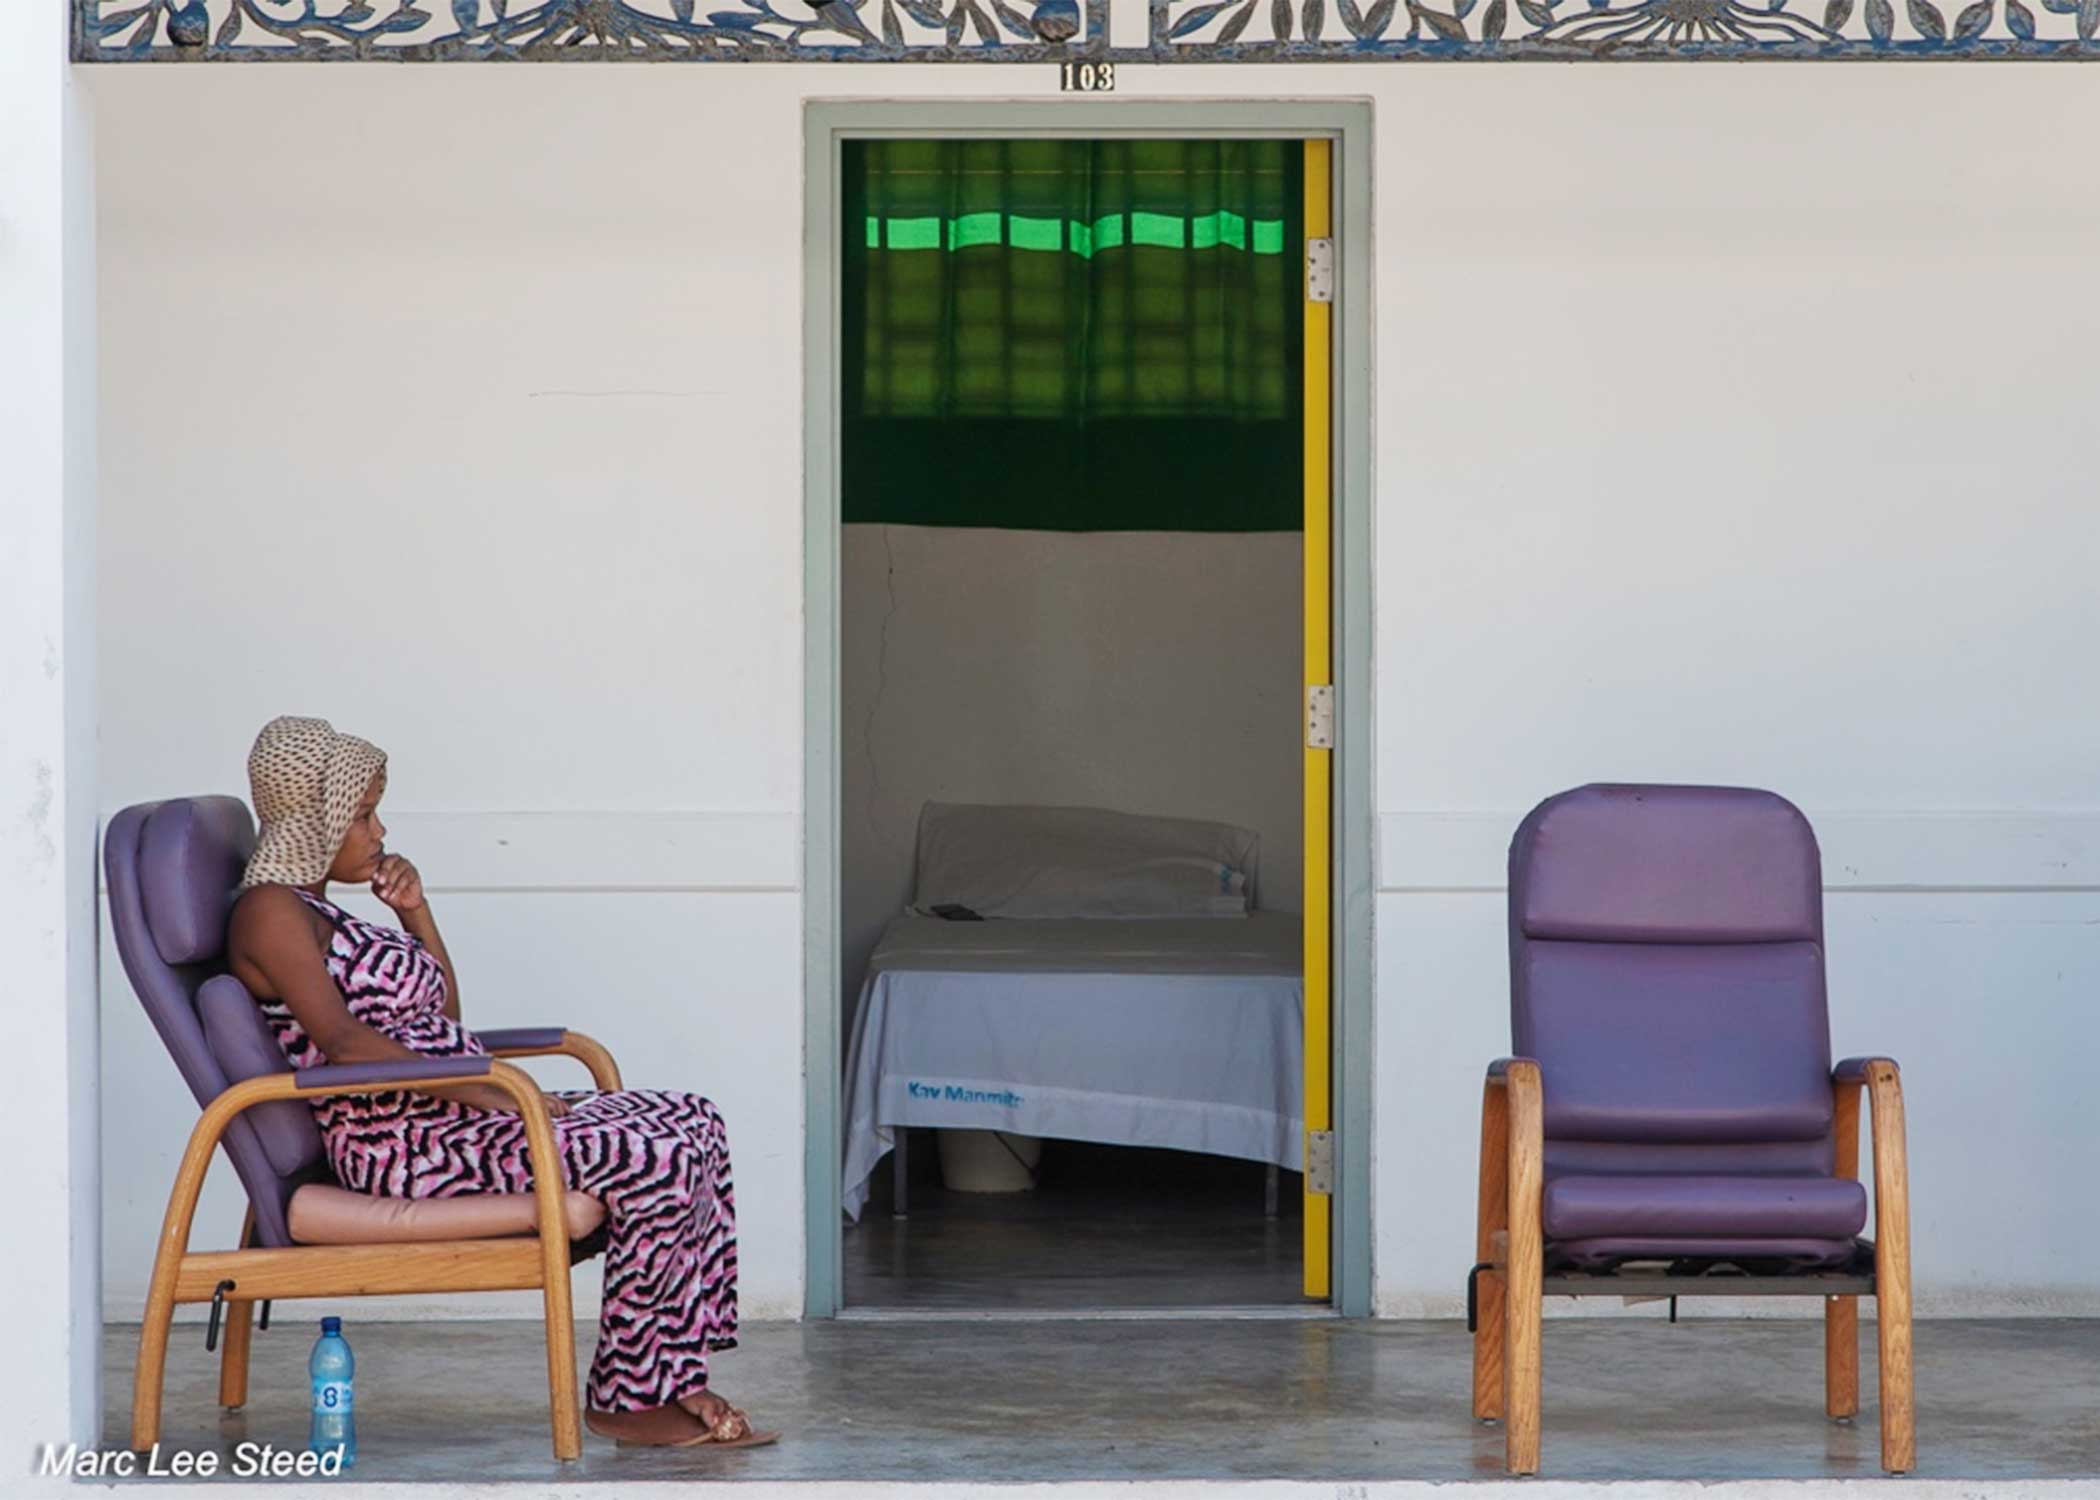 A pregnant Haitian woman sitting on a chair in the patio area at the University Hospital in Haiti.